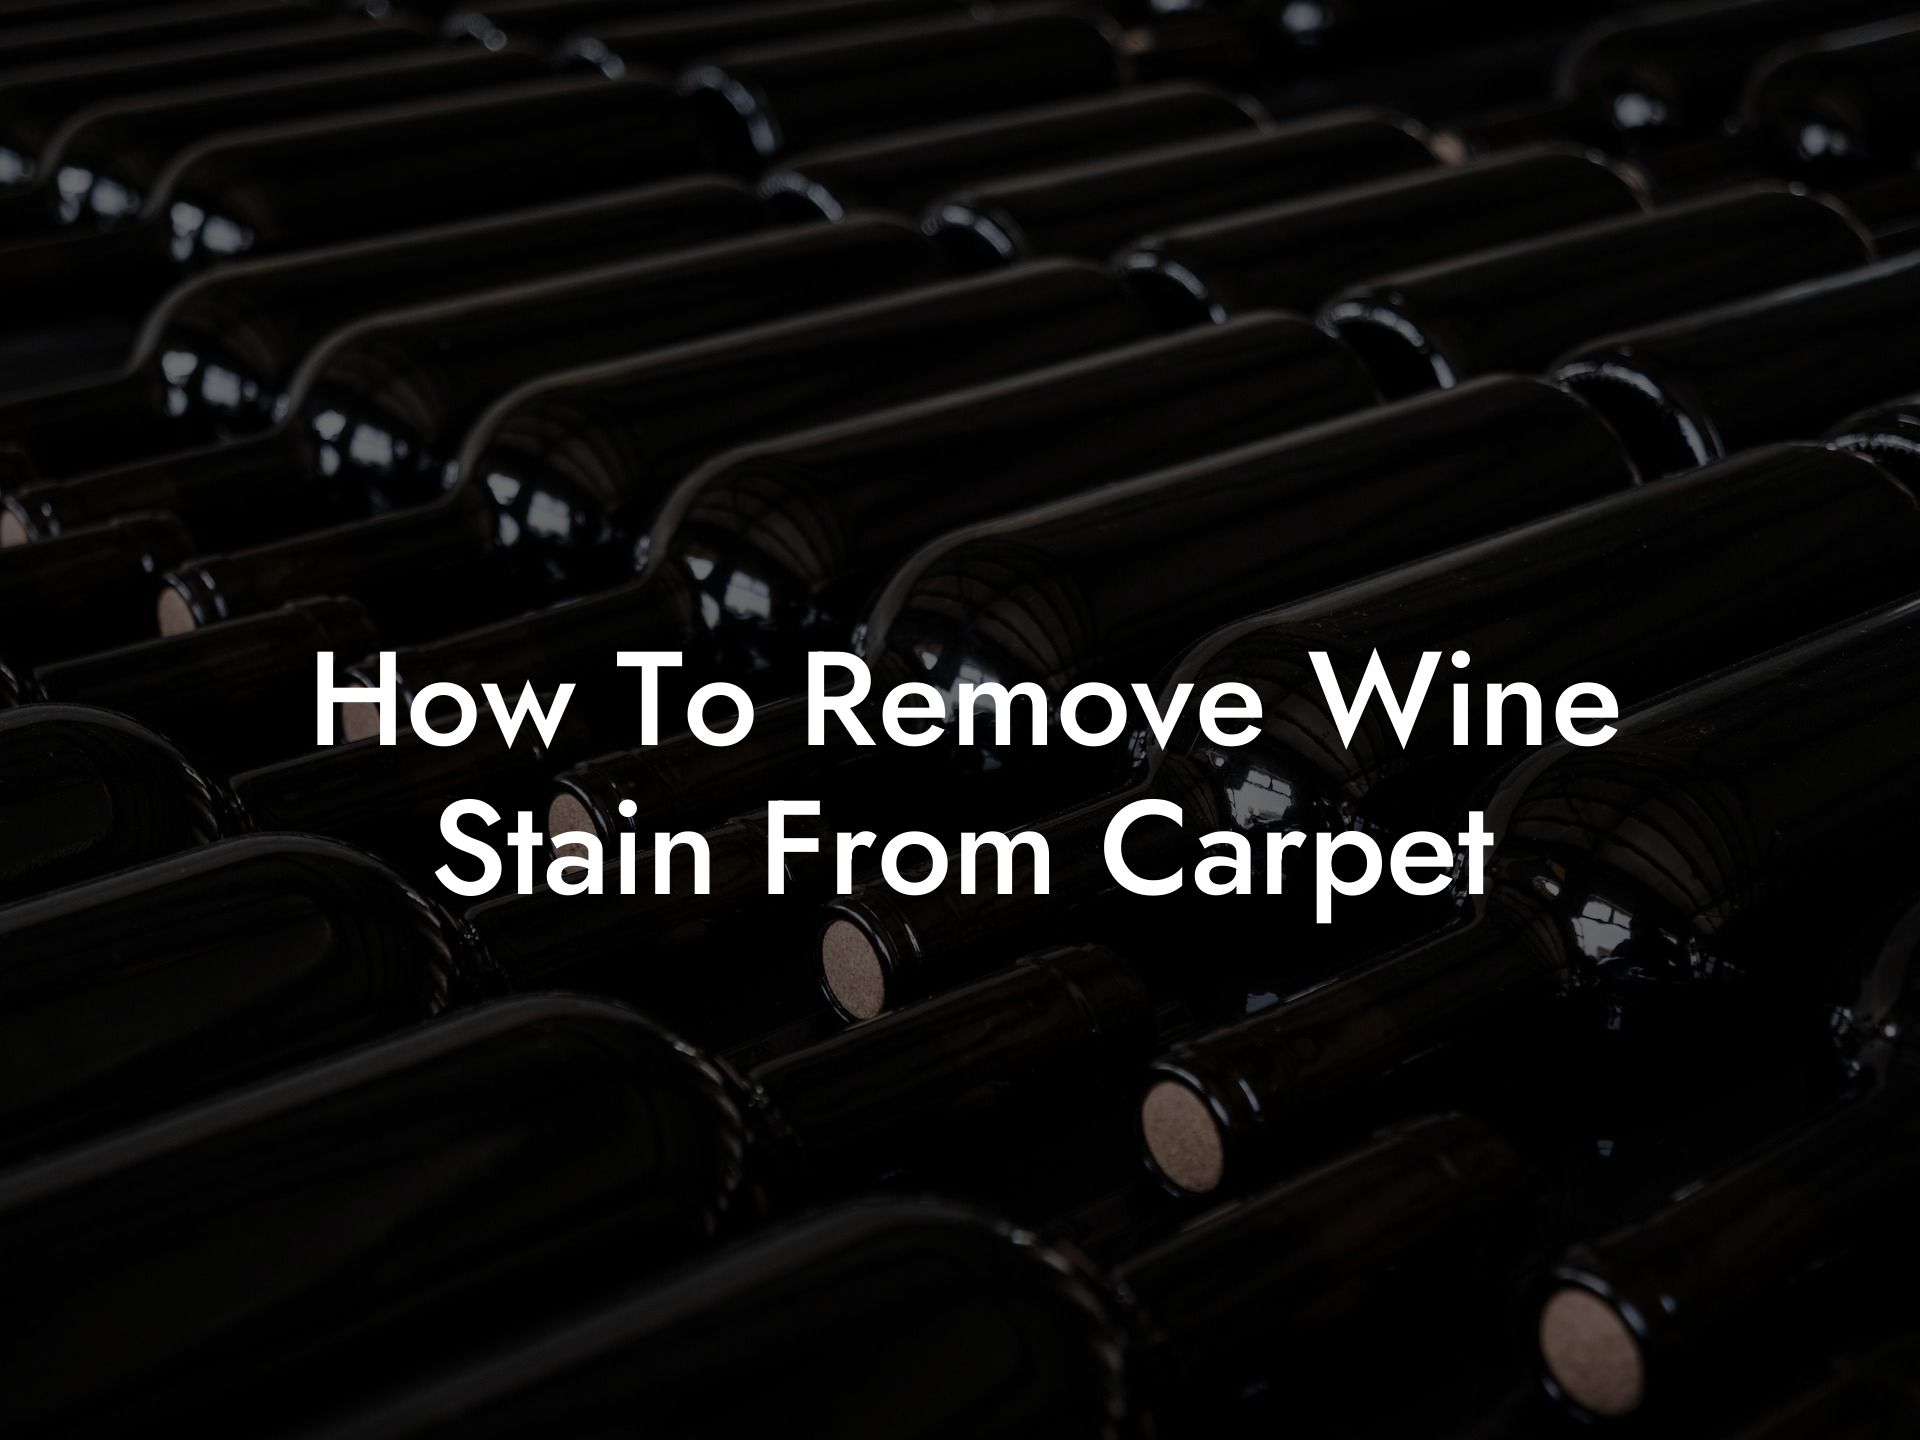 How To Remove Wine Stain From Carpet